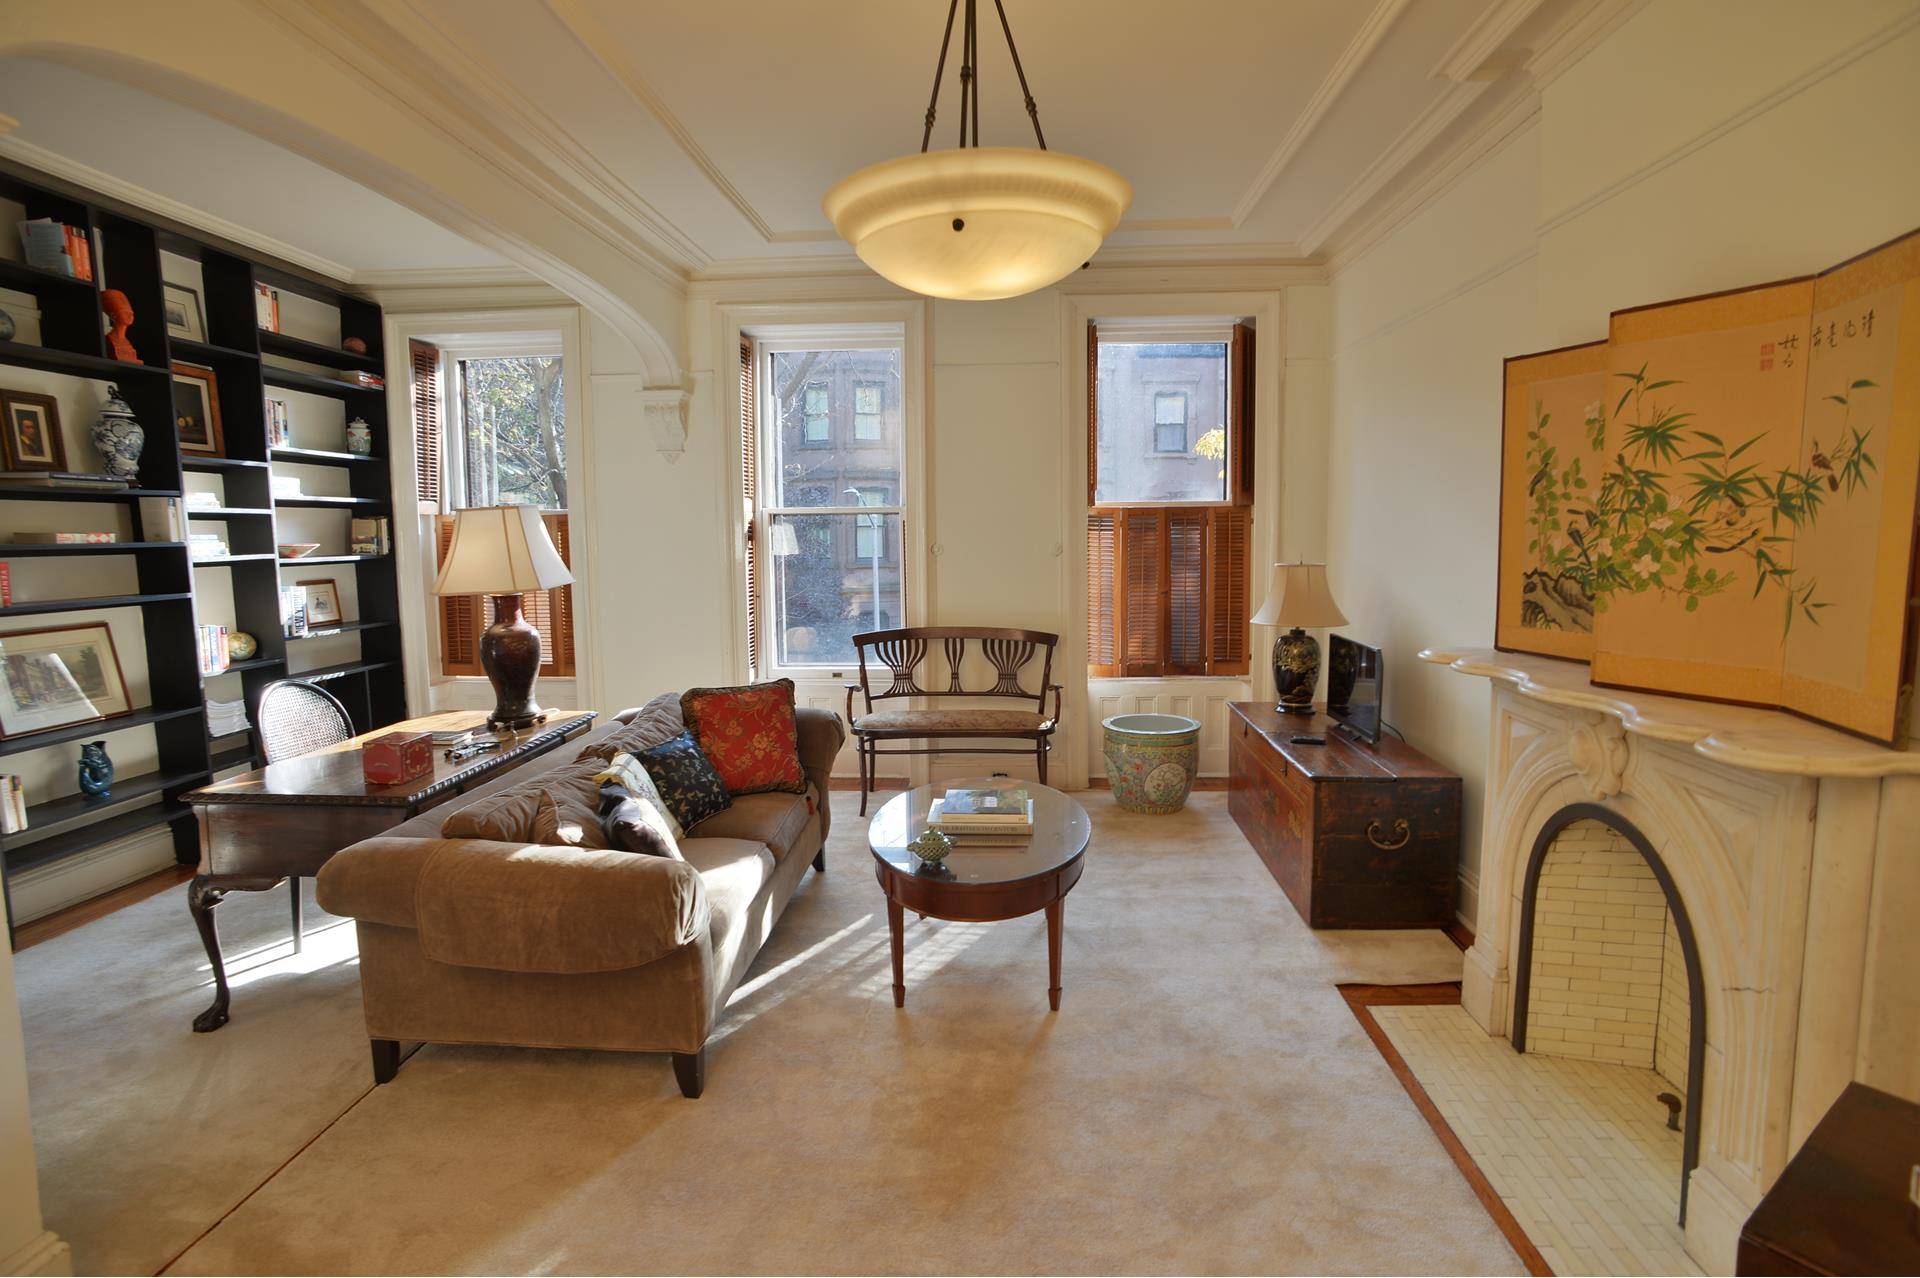 Enjoy the luxury of space and style this elegant home in the North Slope one block from Grand Army Plaza and Prospect Park.